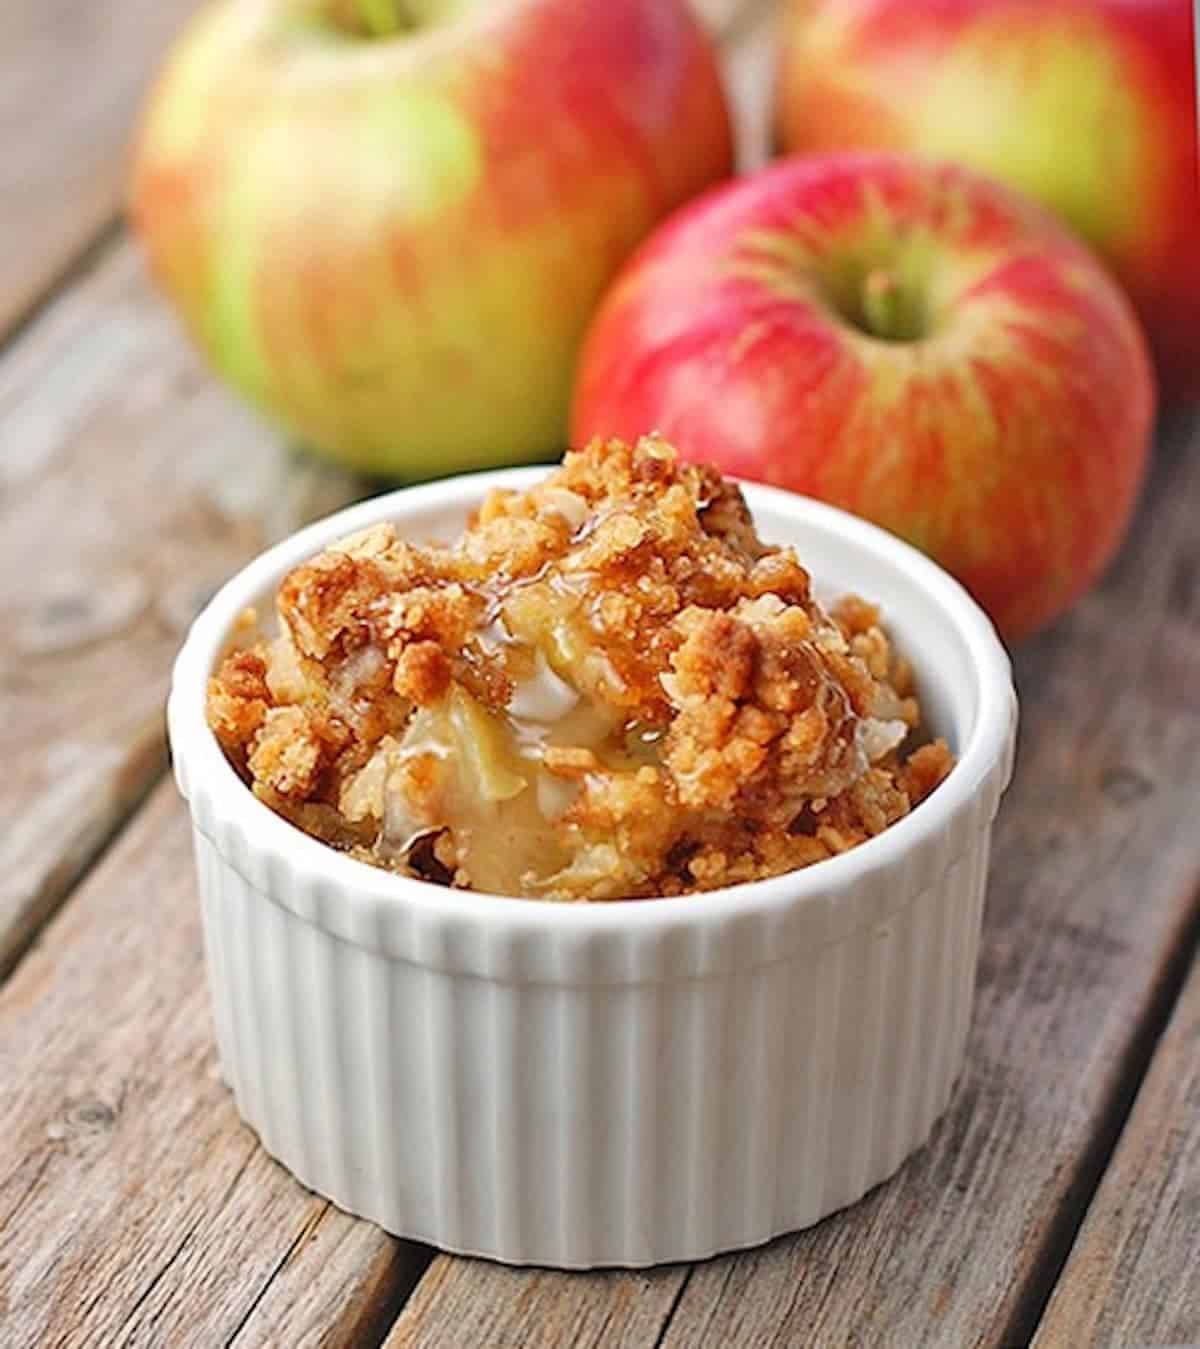 Apple crisp in a white dish with apples.